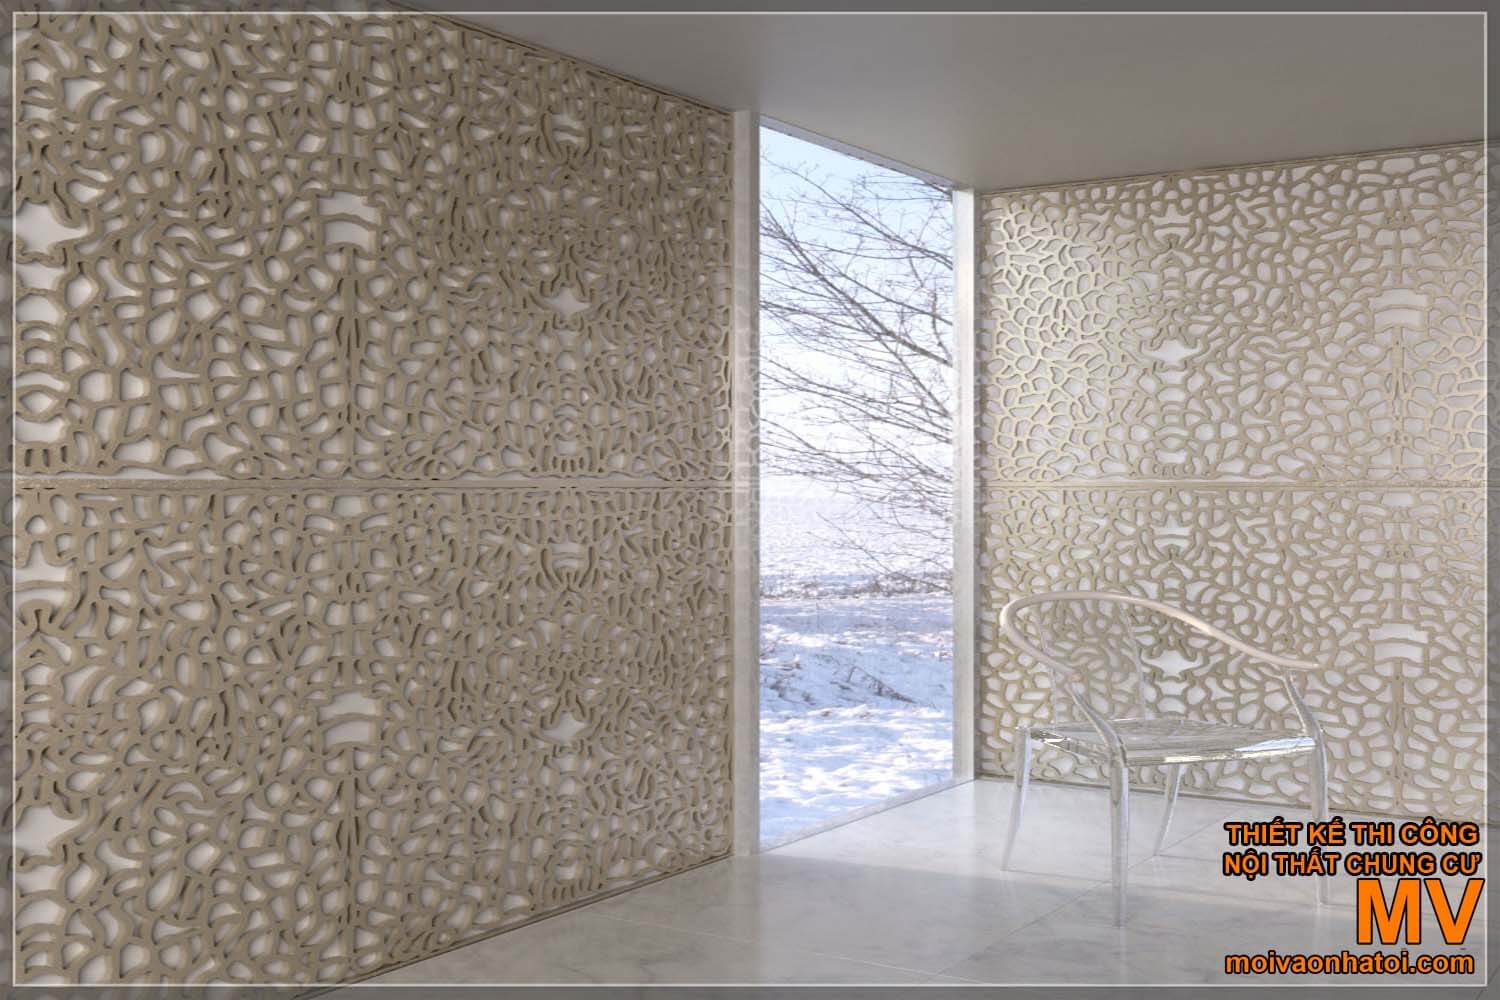 3D wall cladding pattern with intricate, beige patterns.  